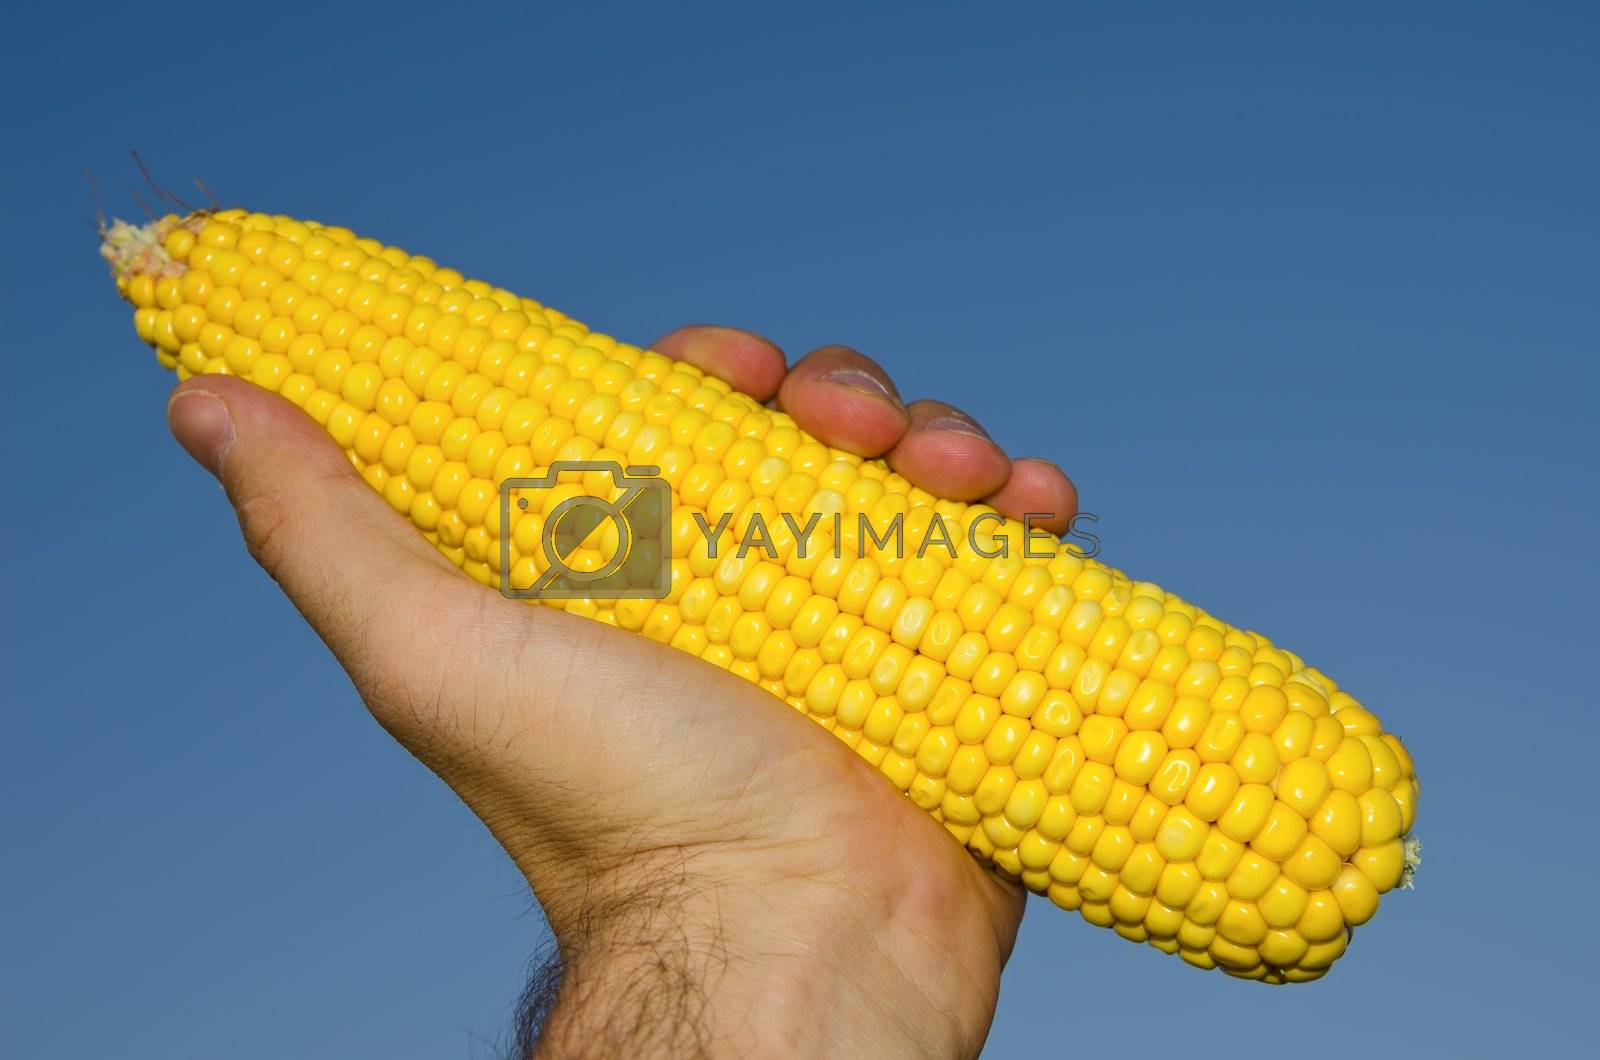 Royalty free image of fresh golden maize in hand by mycola